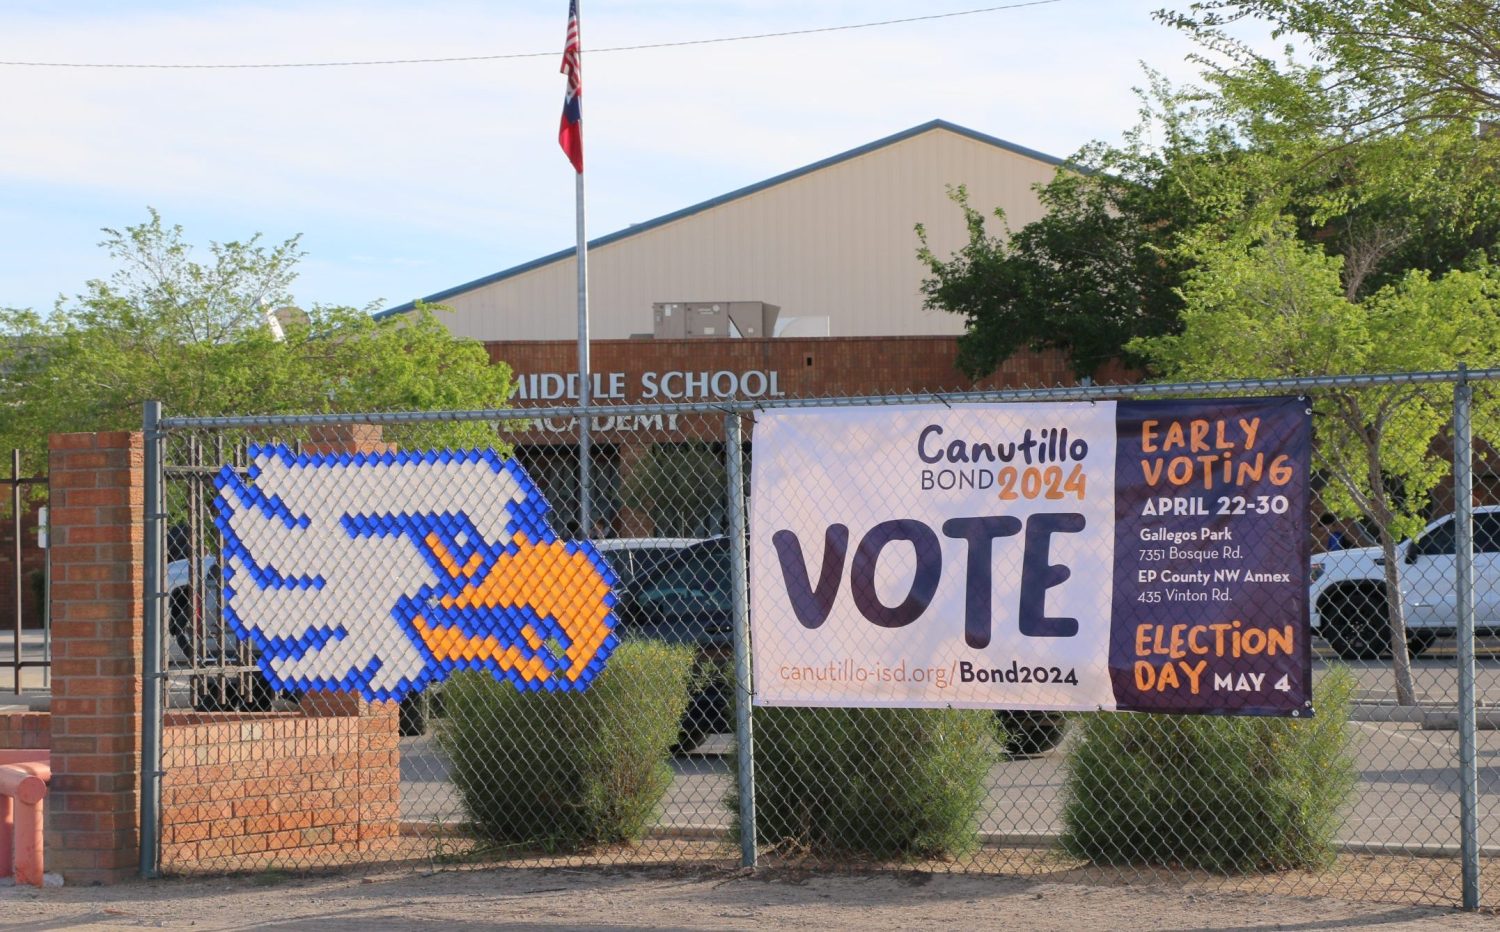 Voters narrowly approve Canutillo ISD bonds for new schools, repairs, debt payoff